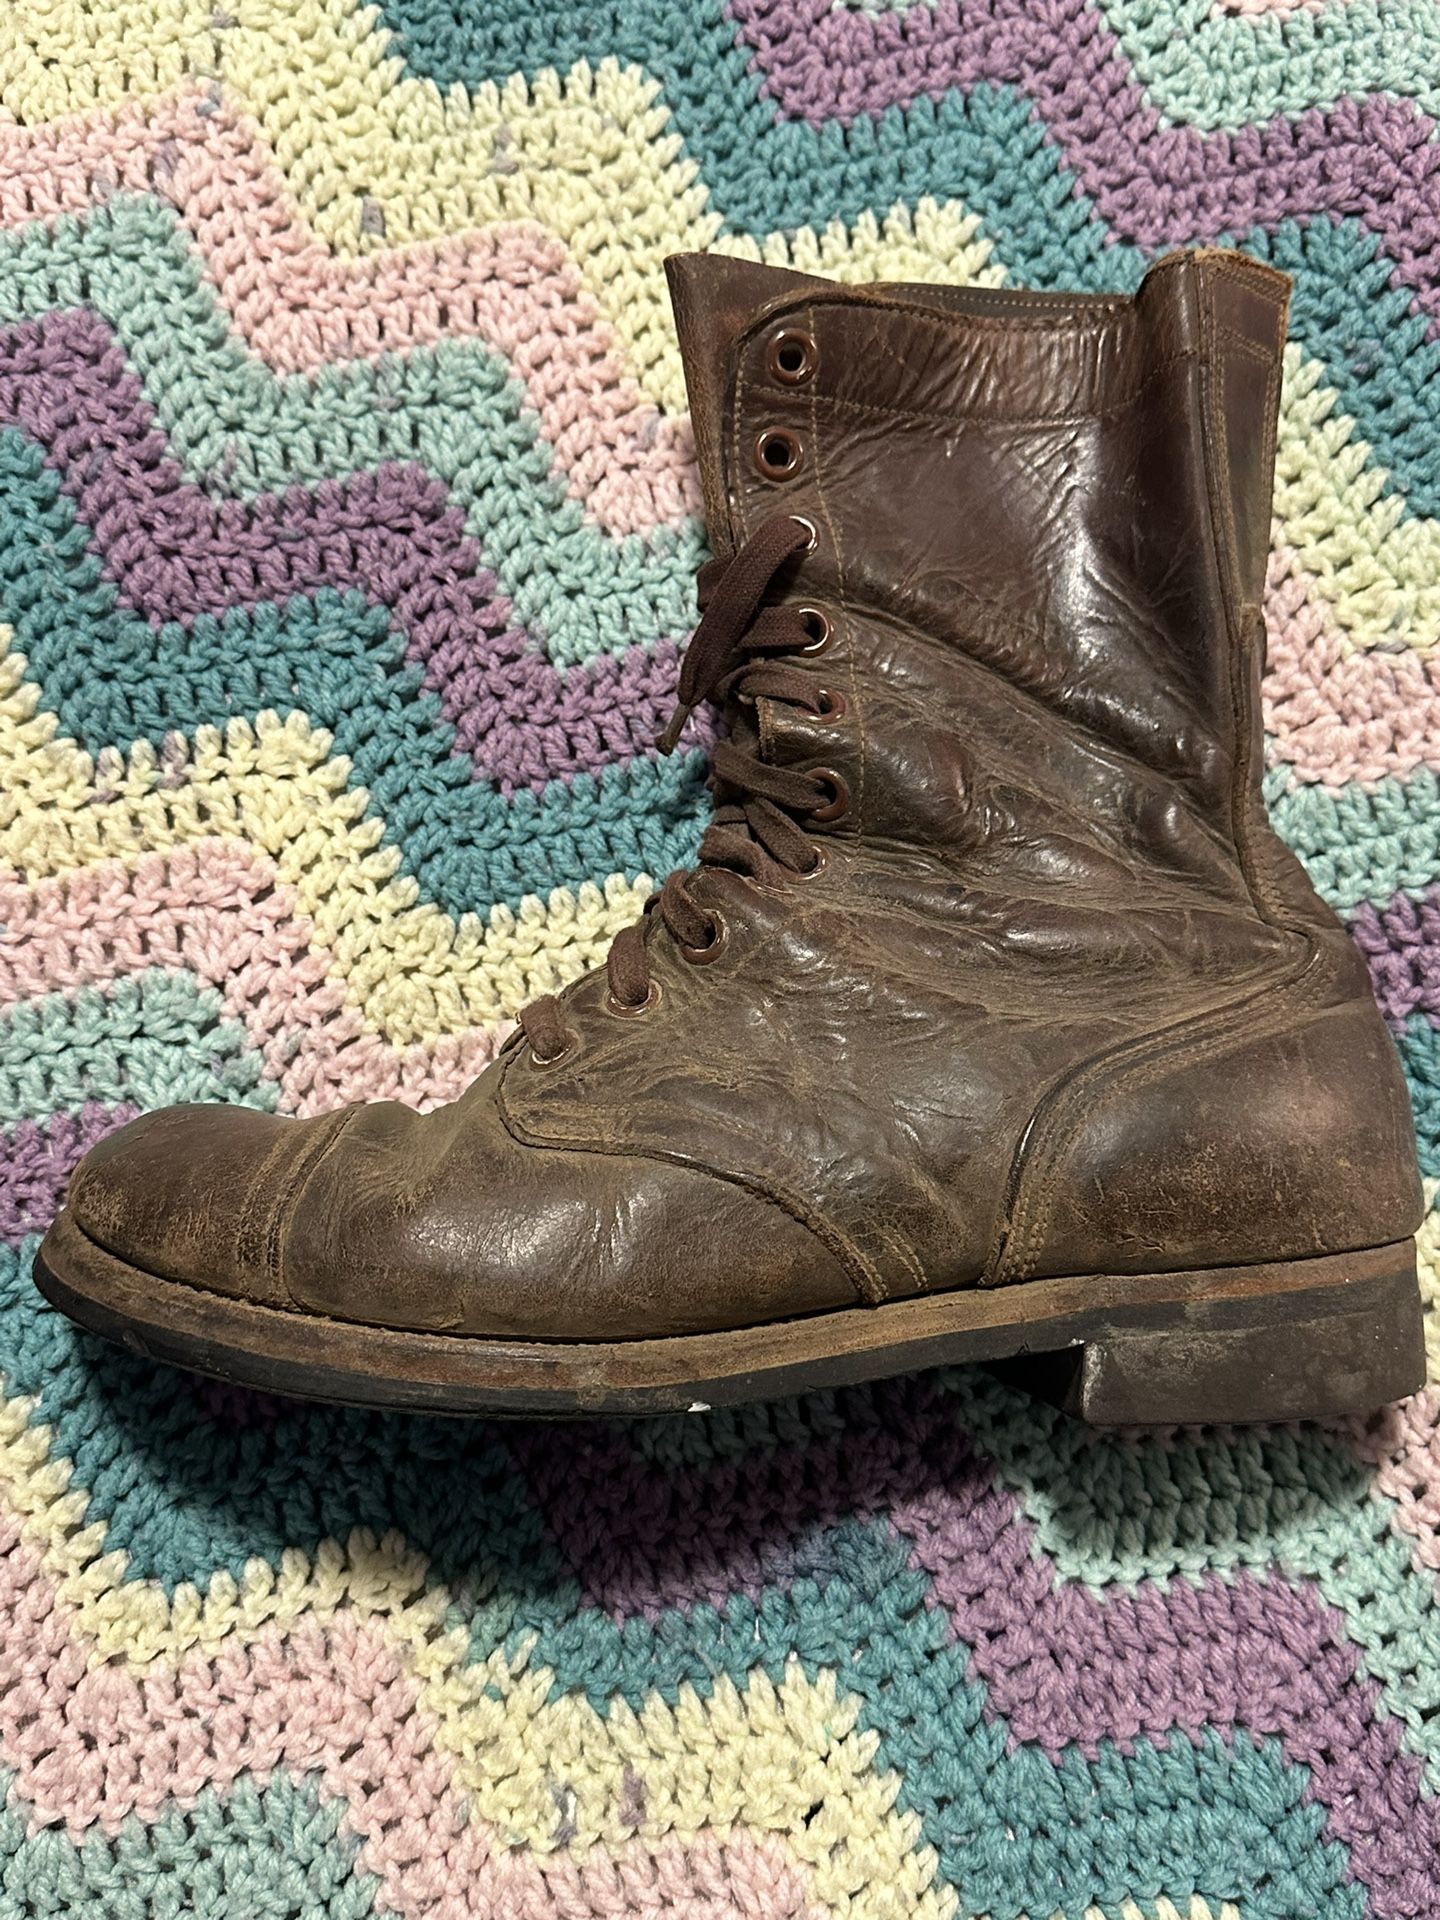 WWII Flight Boots Size 10